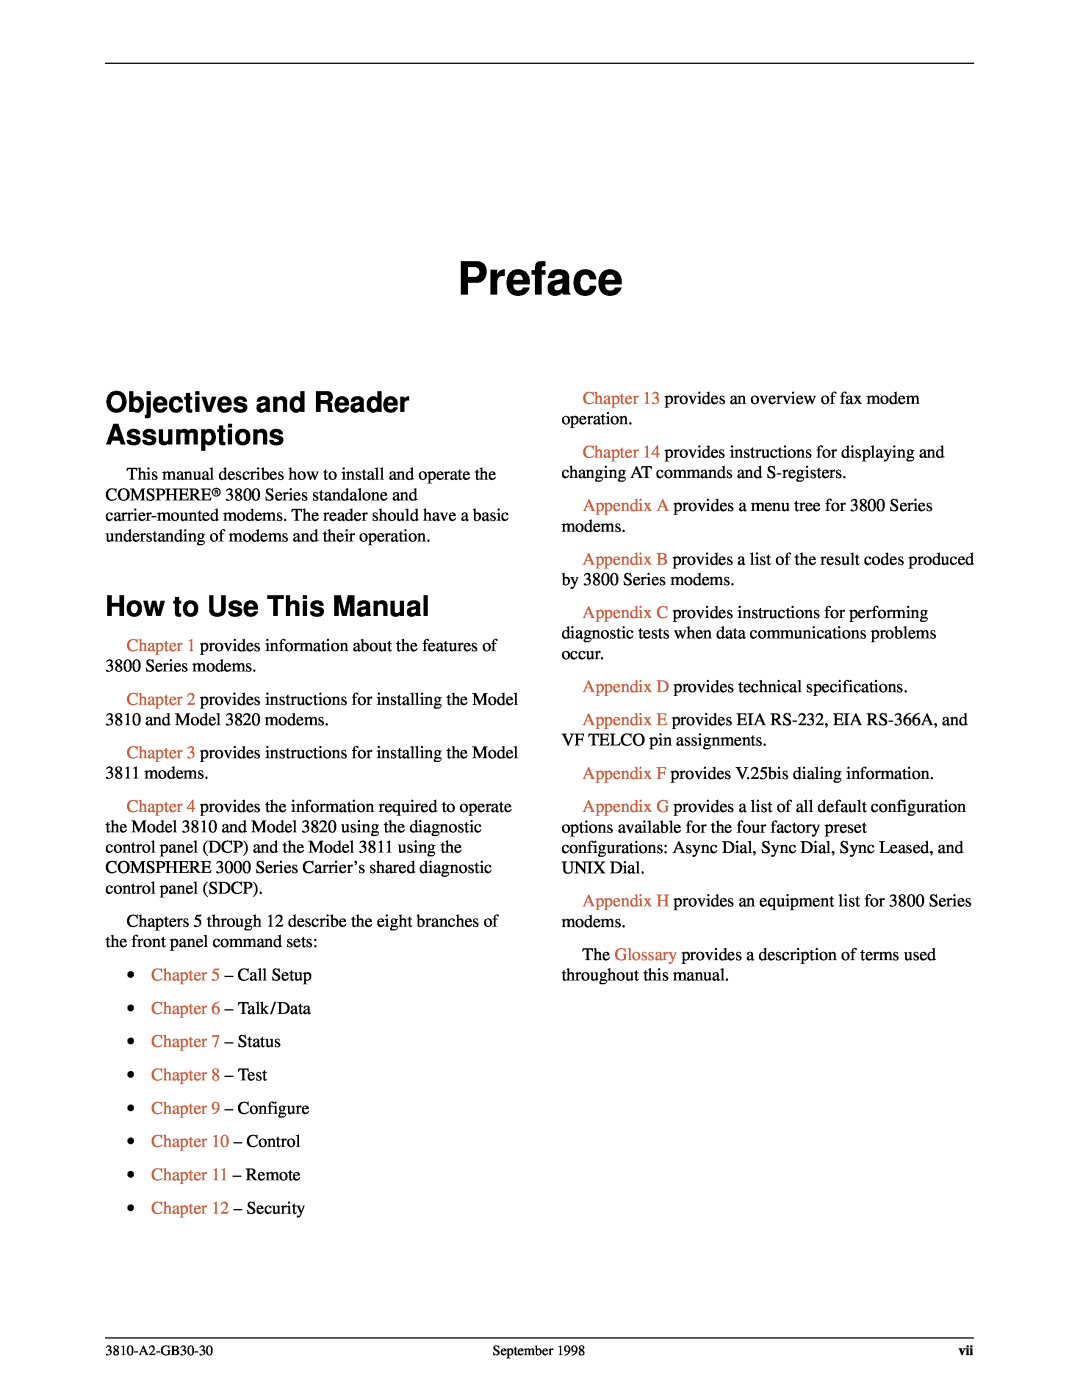 Paradyne 3800 manual Preface, Objectives and Reader Assumptions, How to Use This Manual, Status - Test 